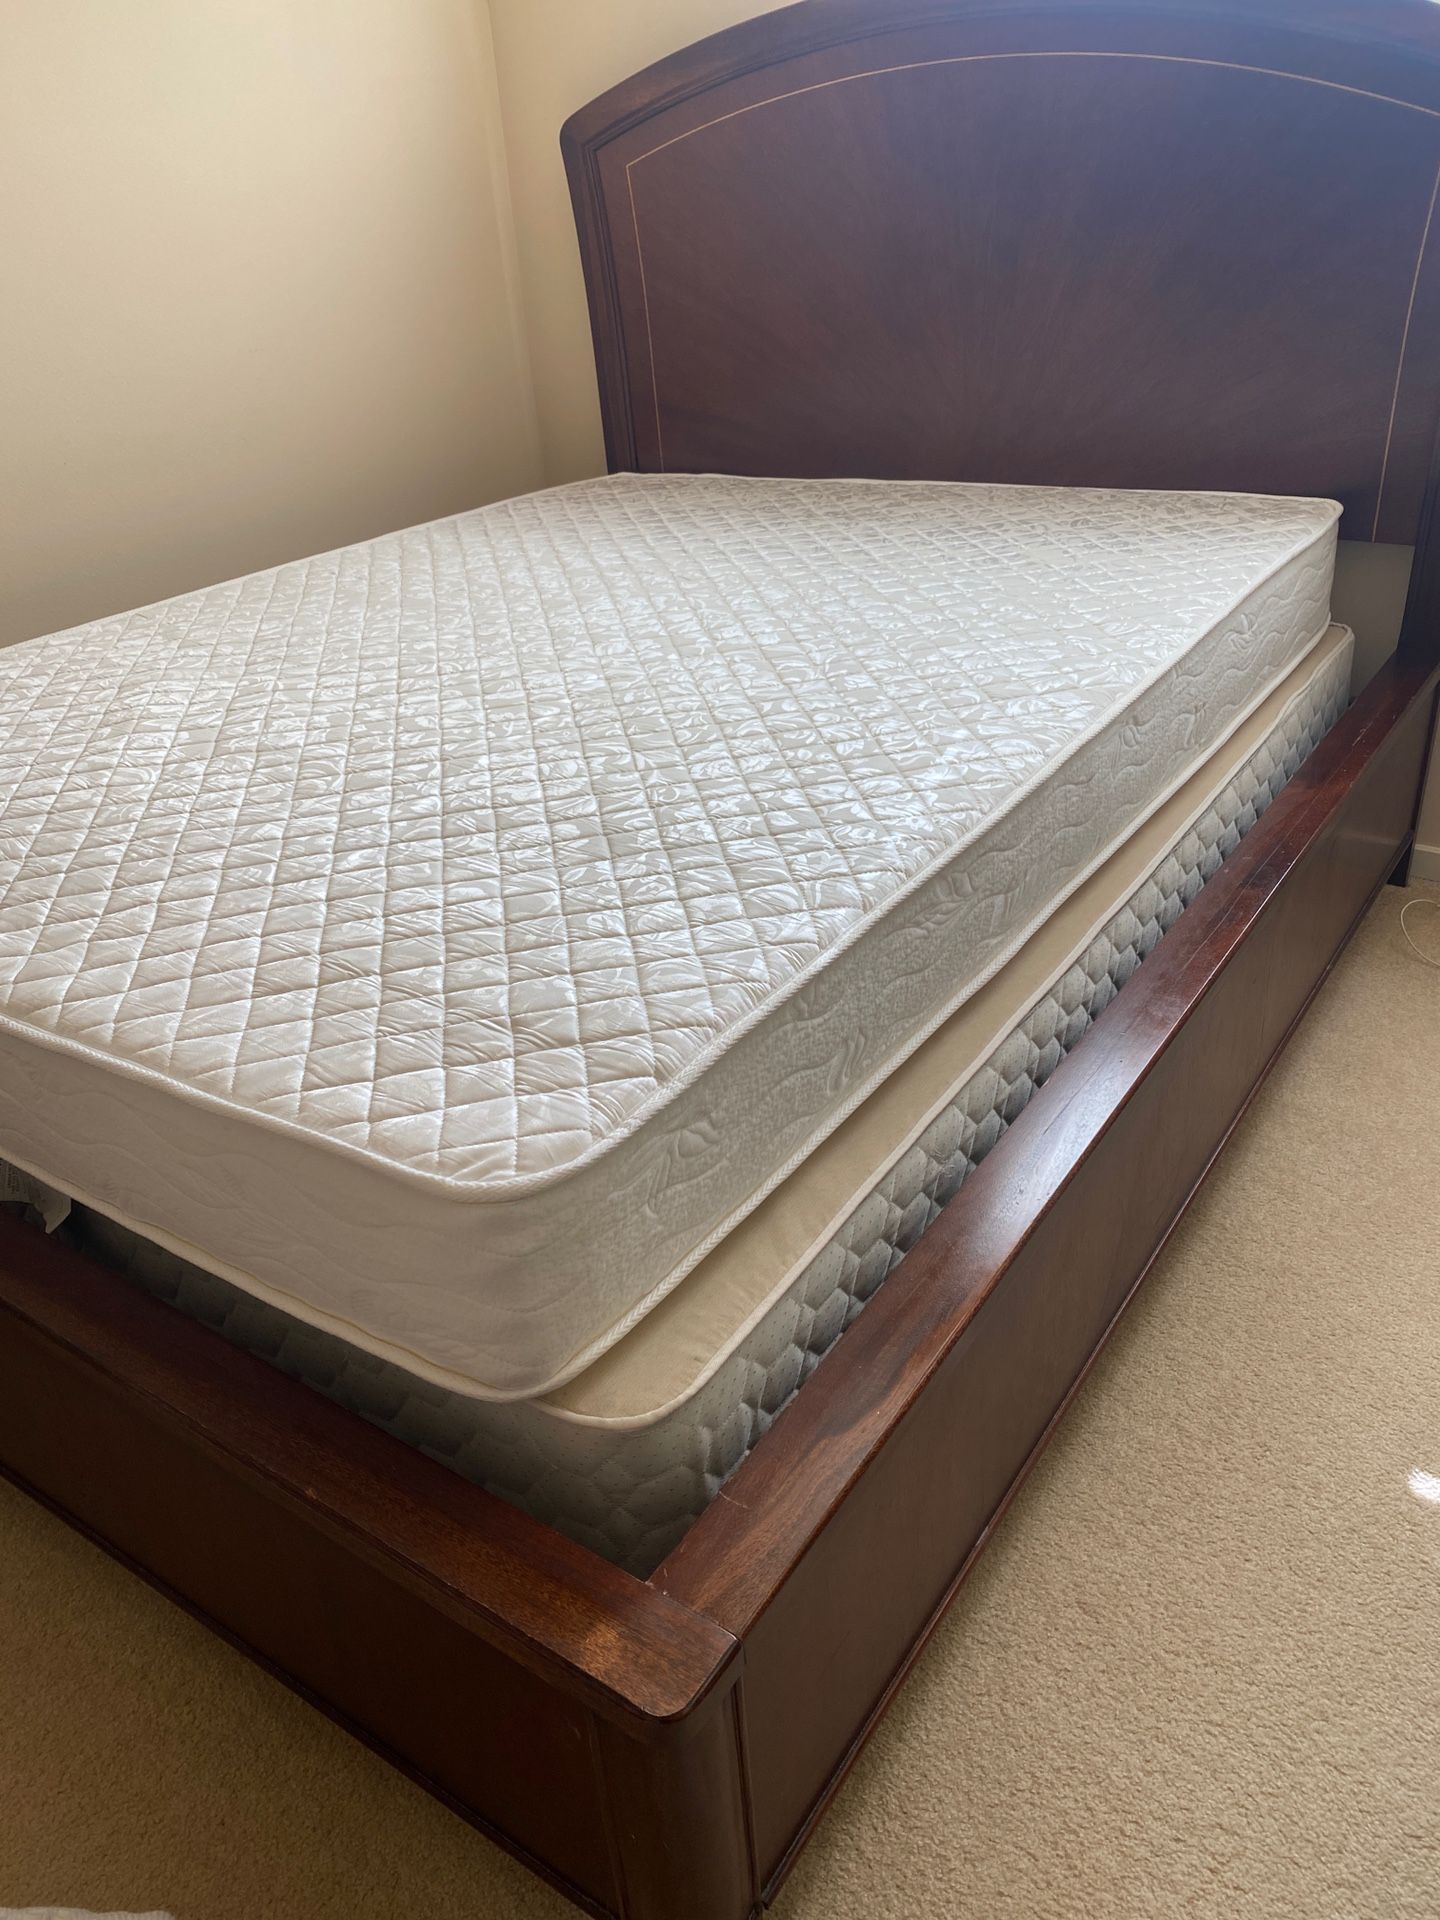 Queen mattress and box spring. Used in spare bedroom. Popsicle stain